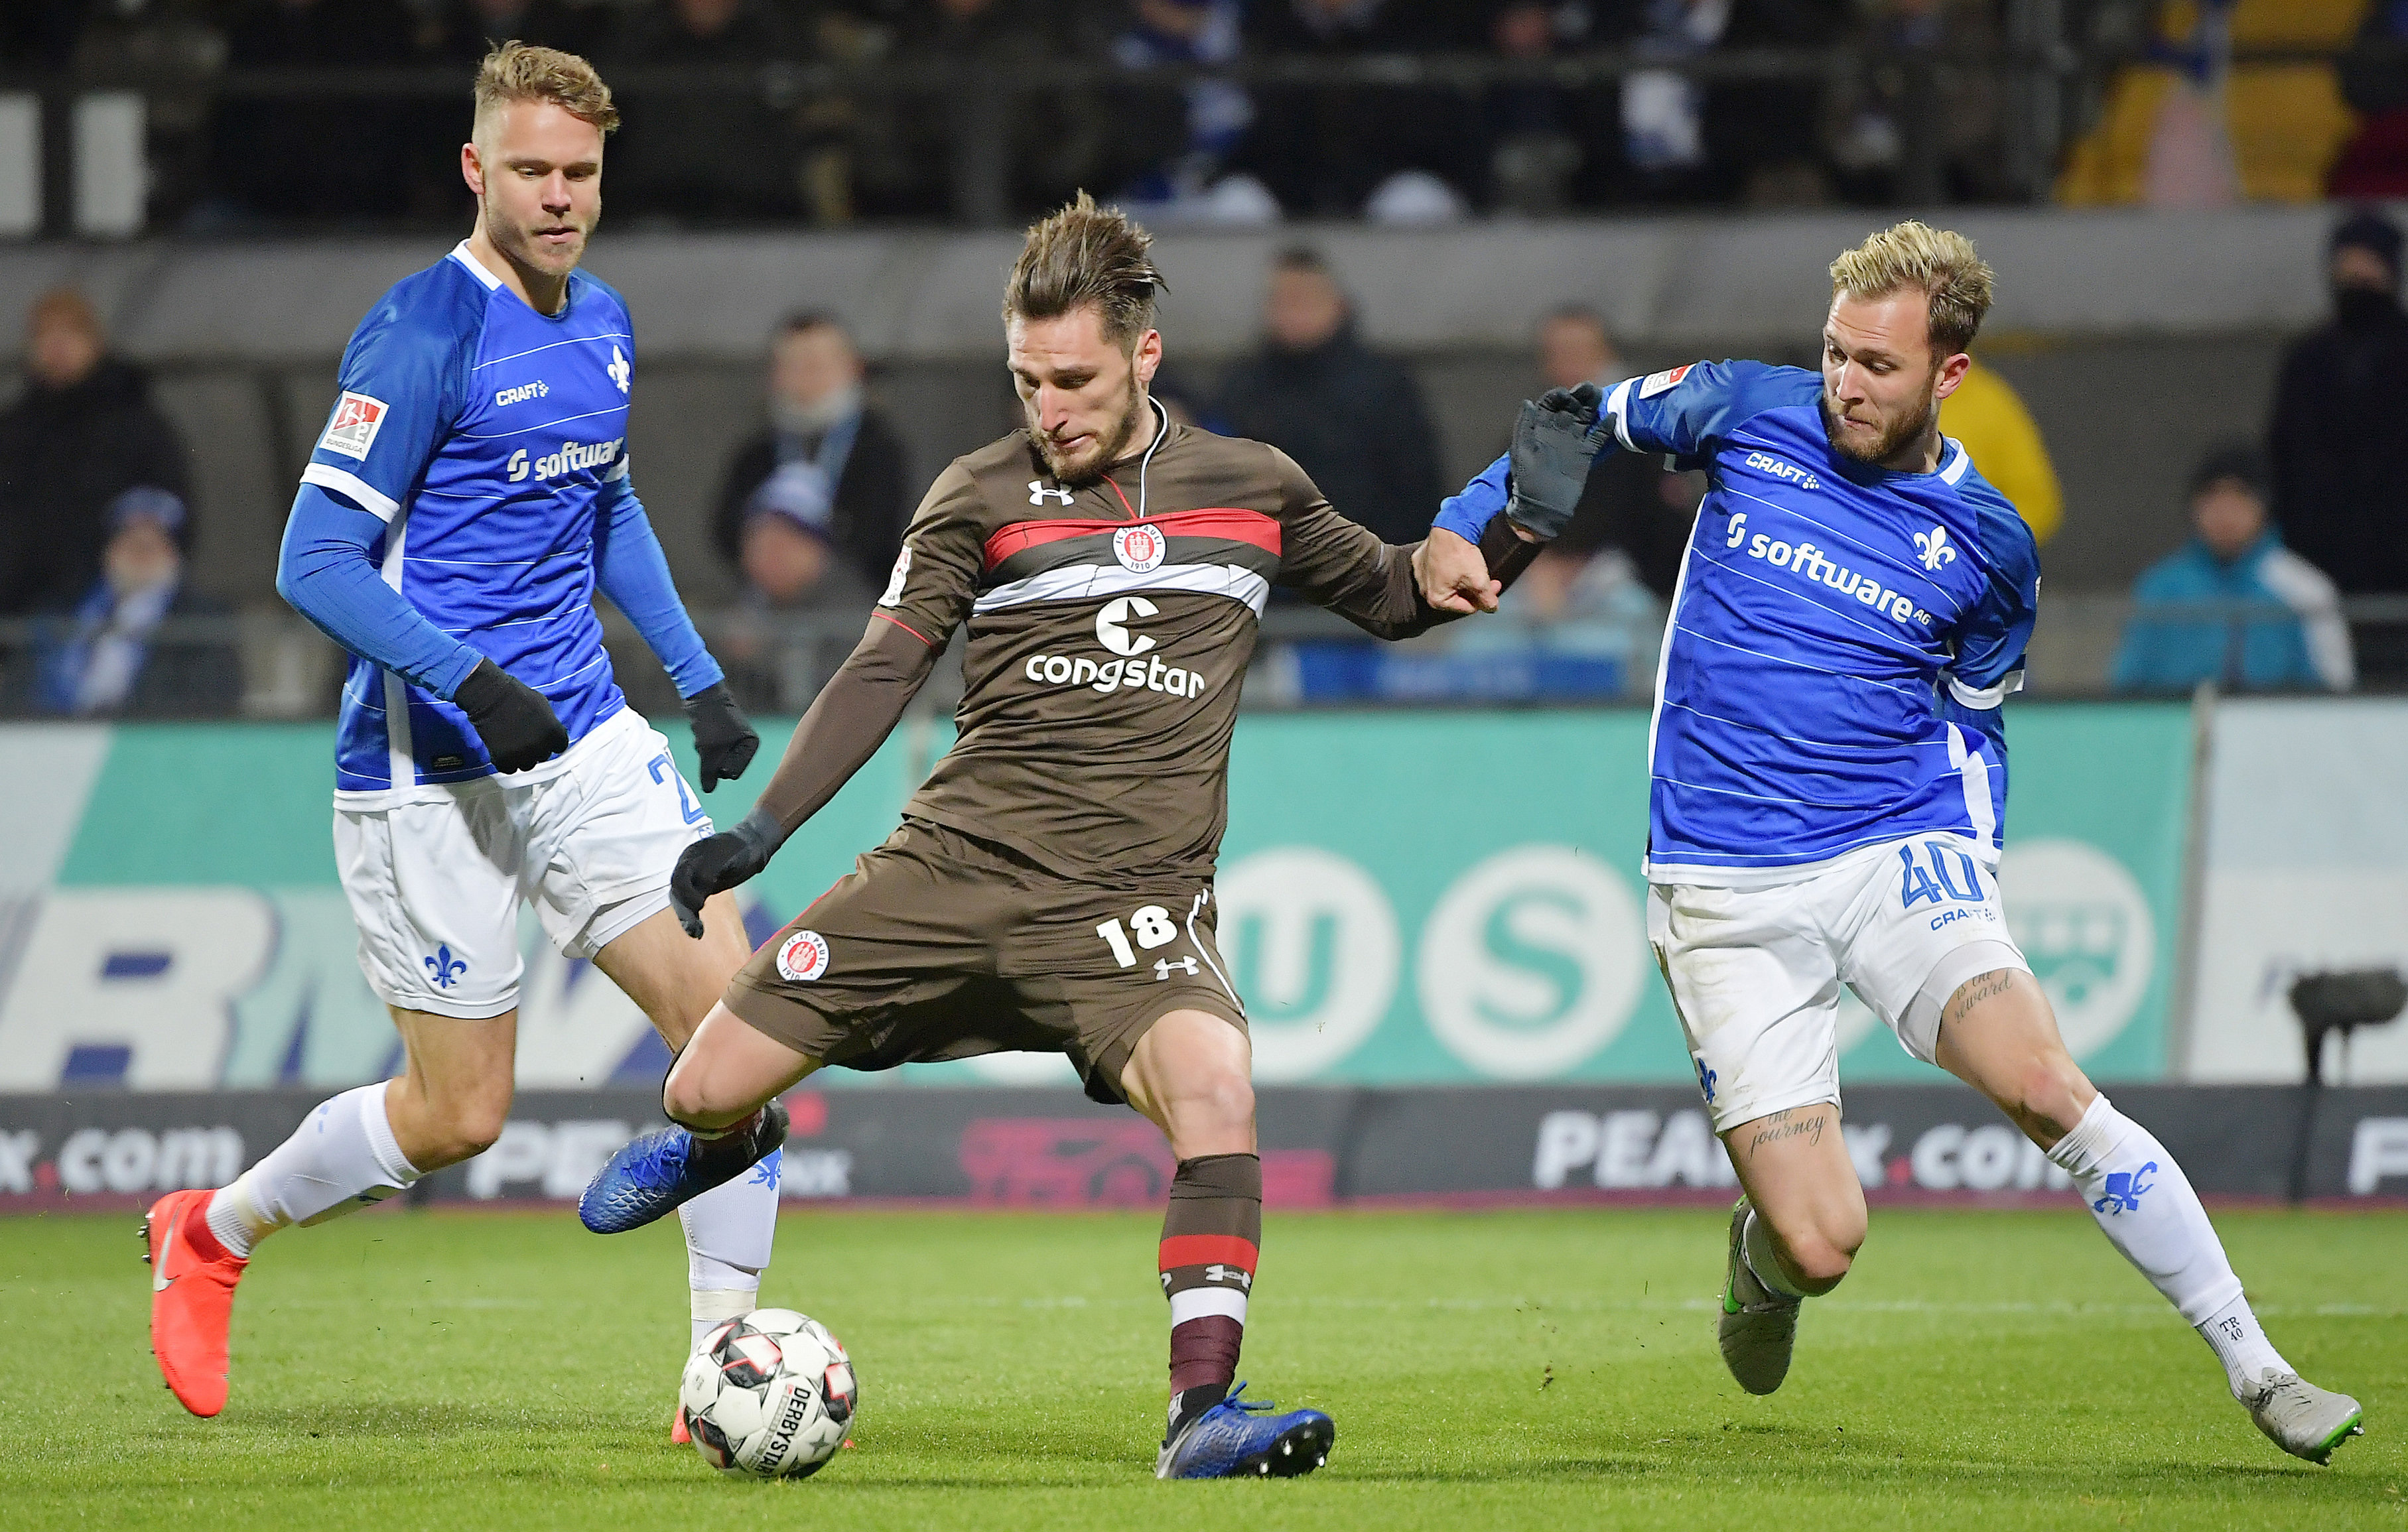 The 2-1 defeat at Darmstadt was the lowest point of the season for Dimitrios Diamantakos.